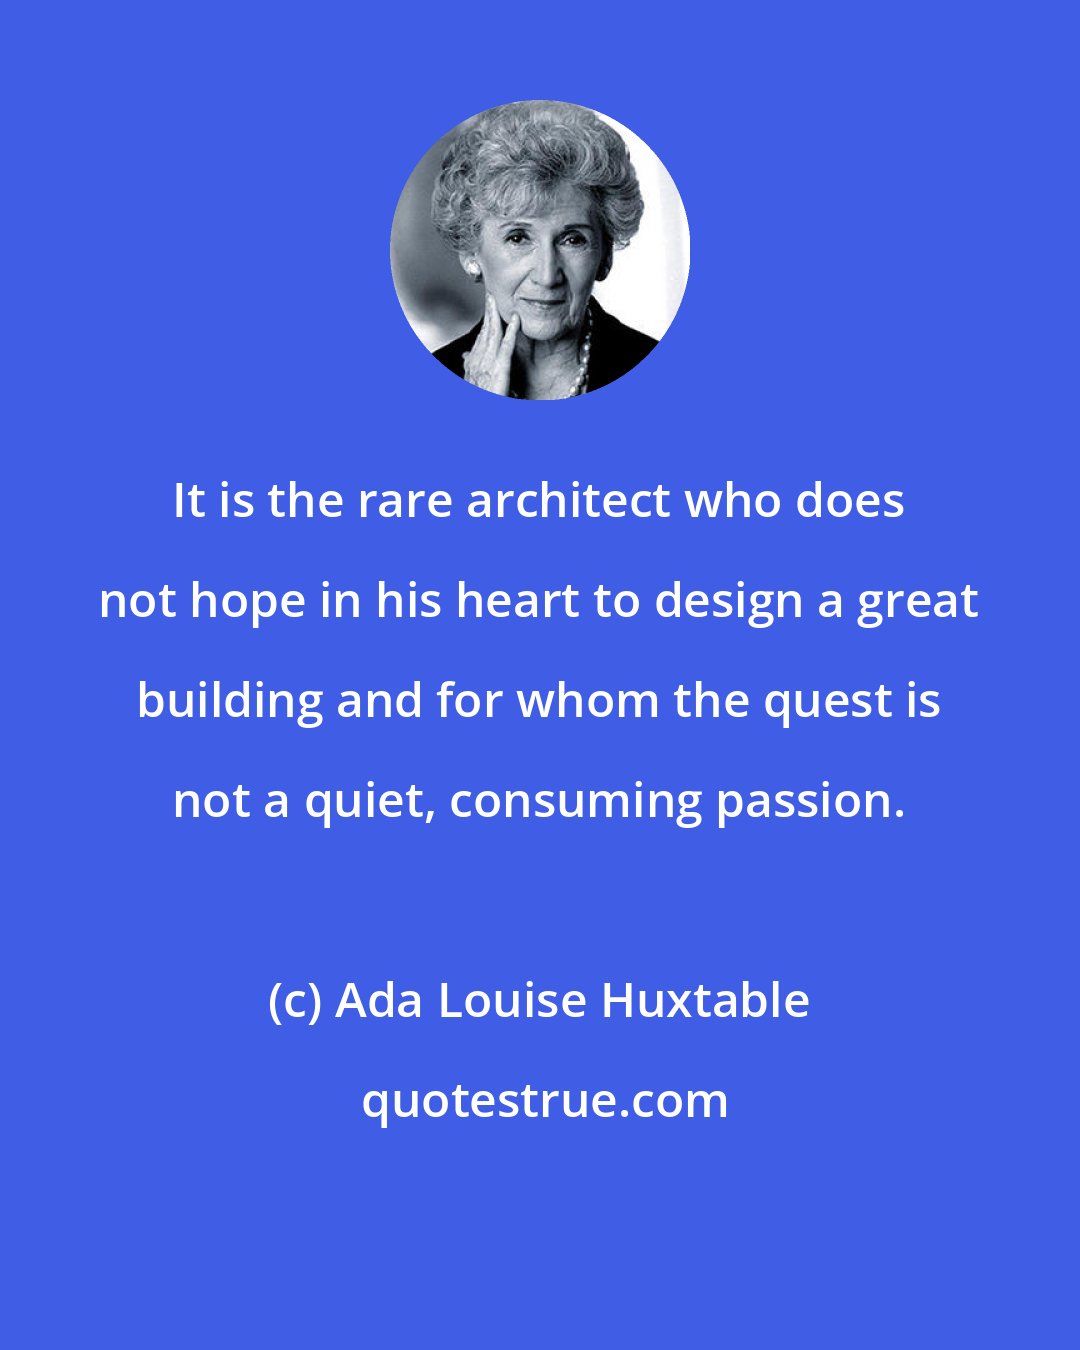 Ada Louise Huxtable: It is the rare architect who does not hope in his heart to design a great building and for whom the quest is not a quiet, consuming passion.